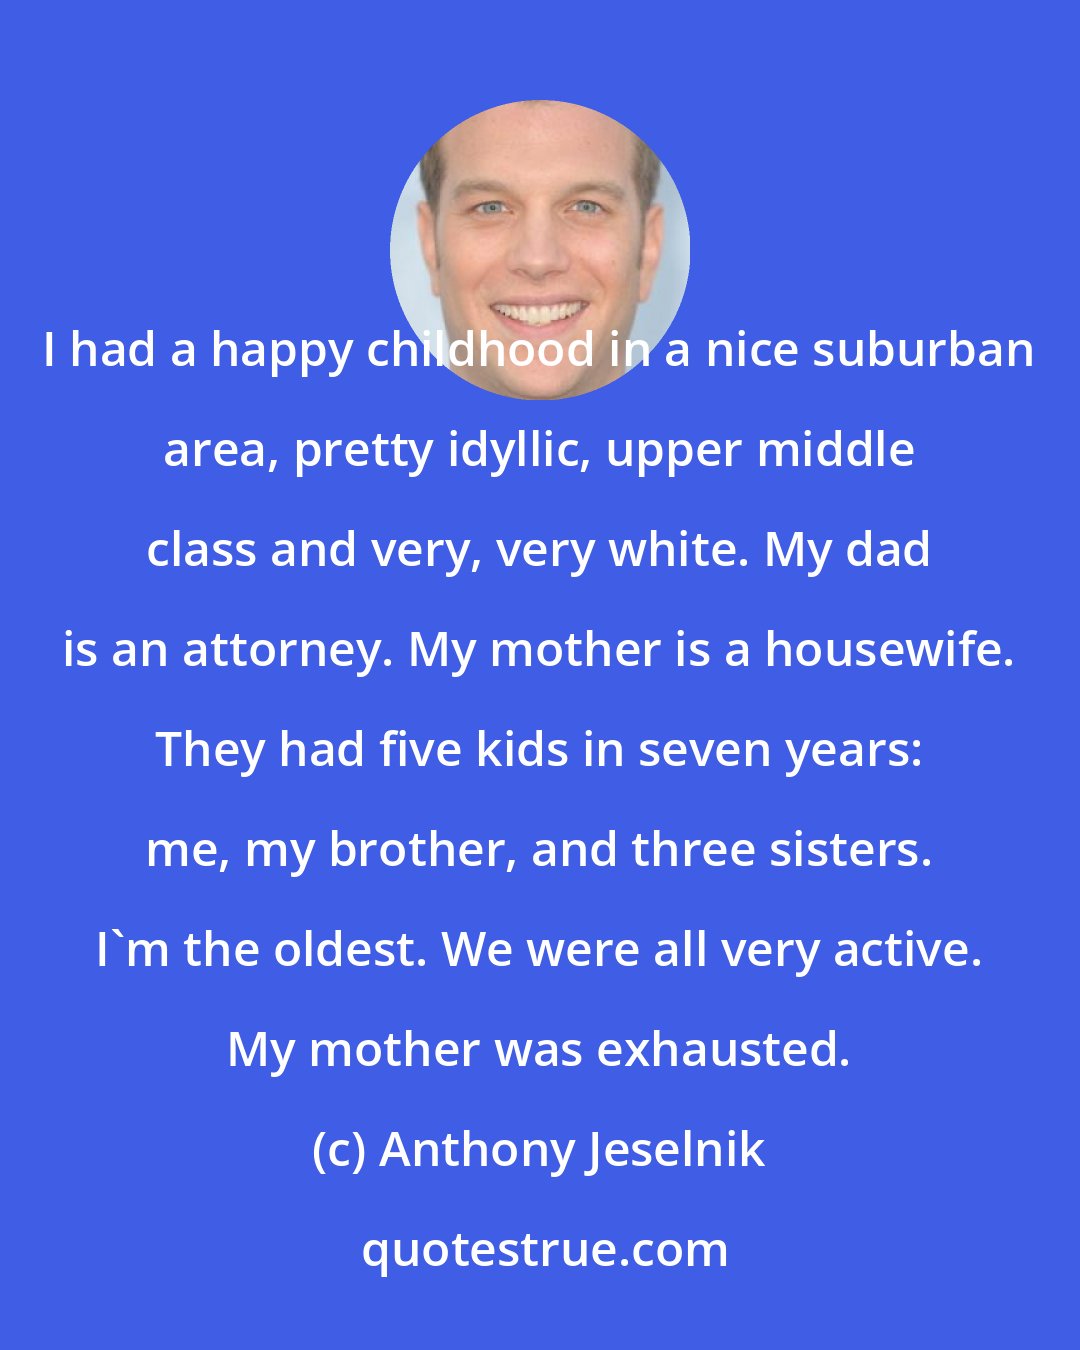 Anthony Jeselnik: I had a happy childhood in a nice suburban area, pretty idyllic, upper middle class and very, very white. My dad is an attorney. My mother is a housewife. They had five kids in seven years: me, my brother, and three sisters. I'm the oldest. We were all very active. My mother was exhausted.